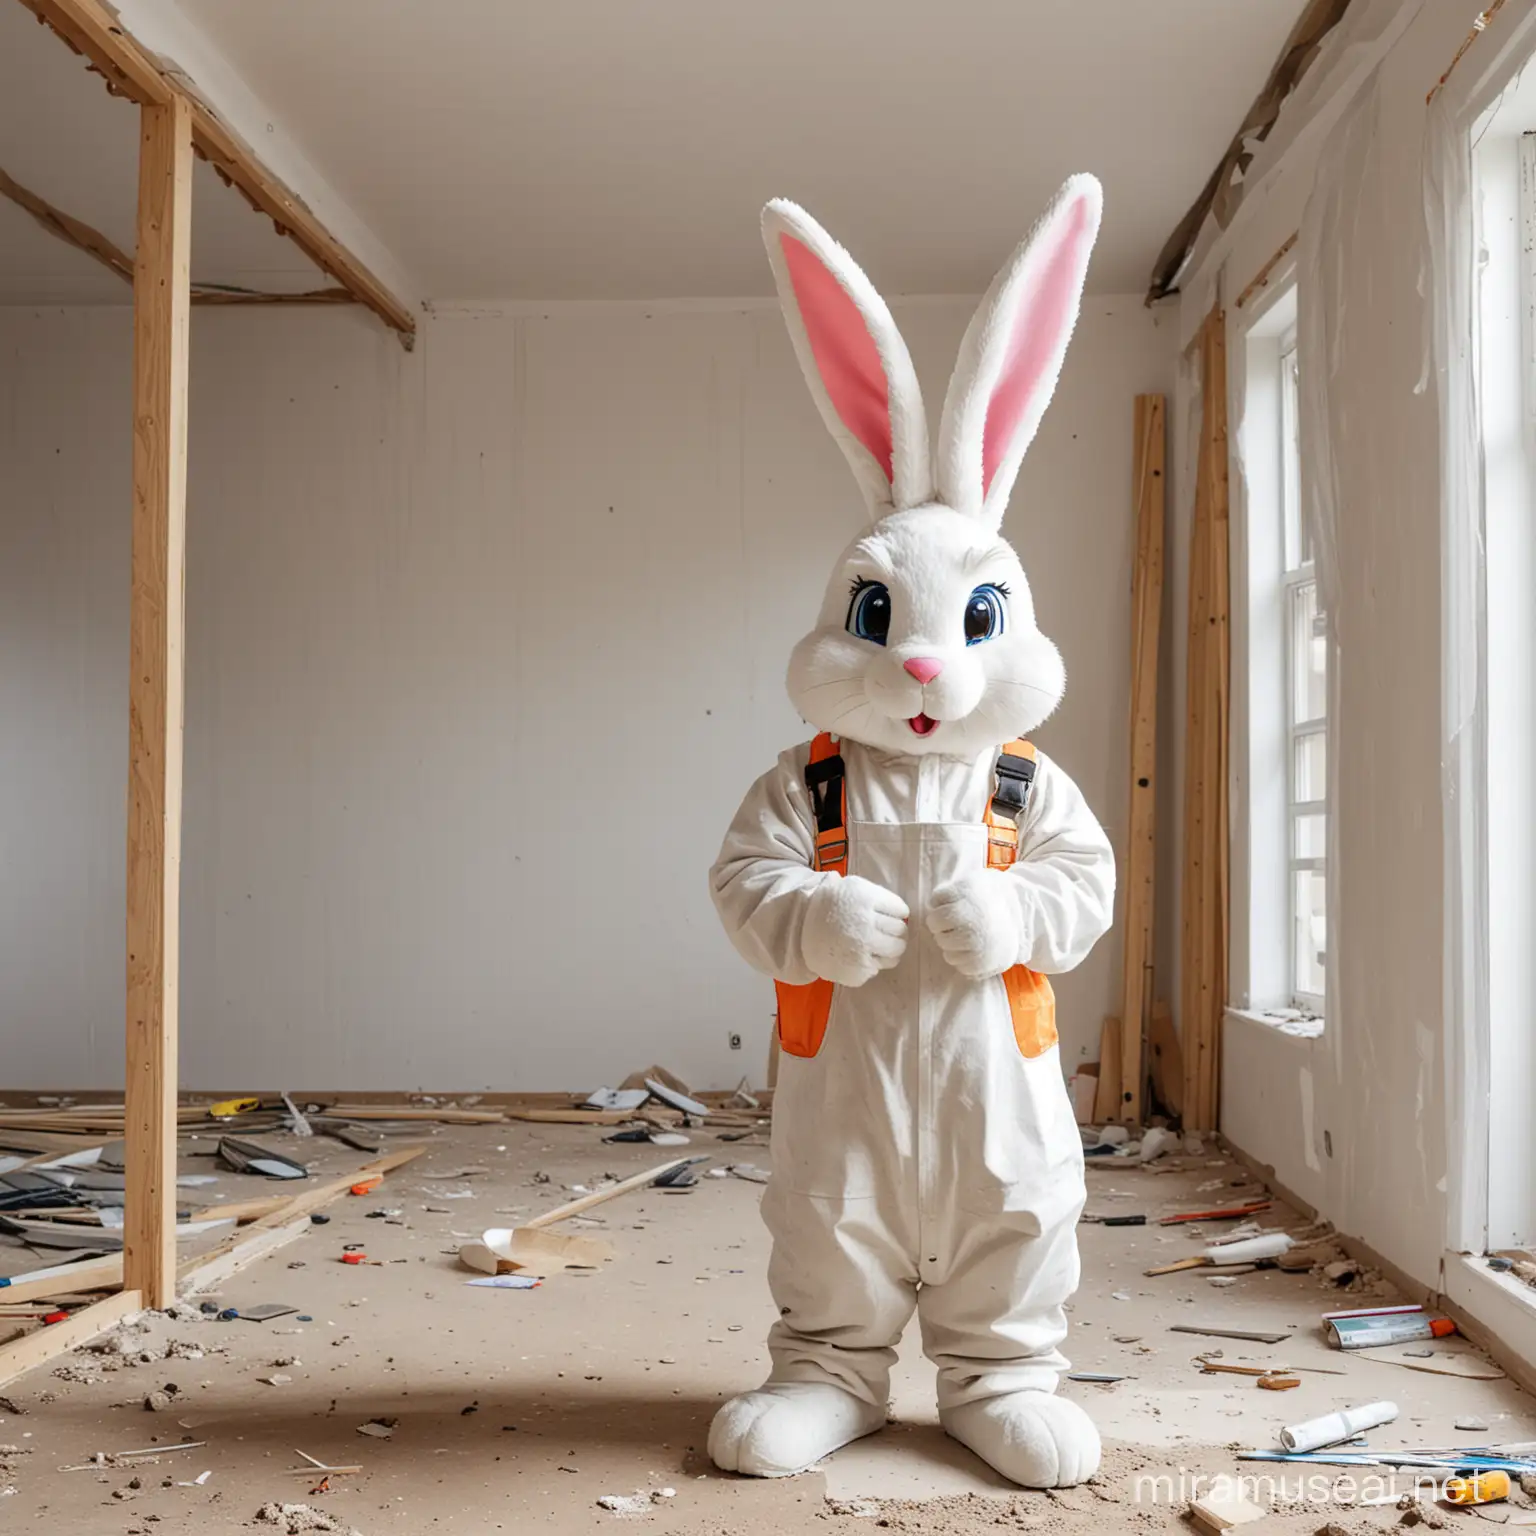 Easter Bunny at a Construction Site with Plasterboards